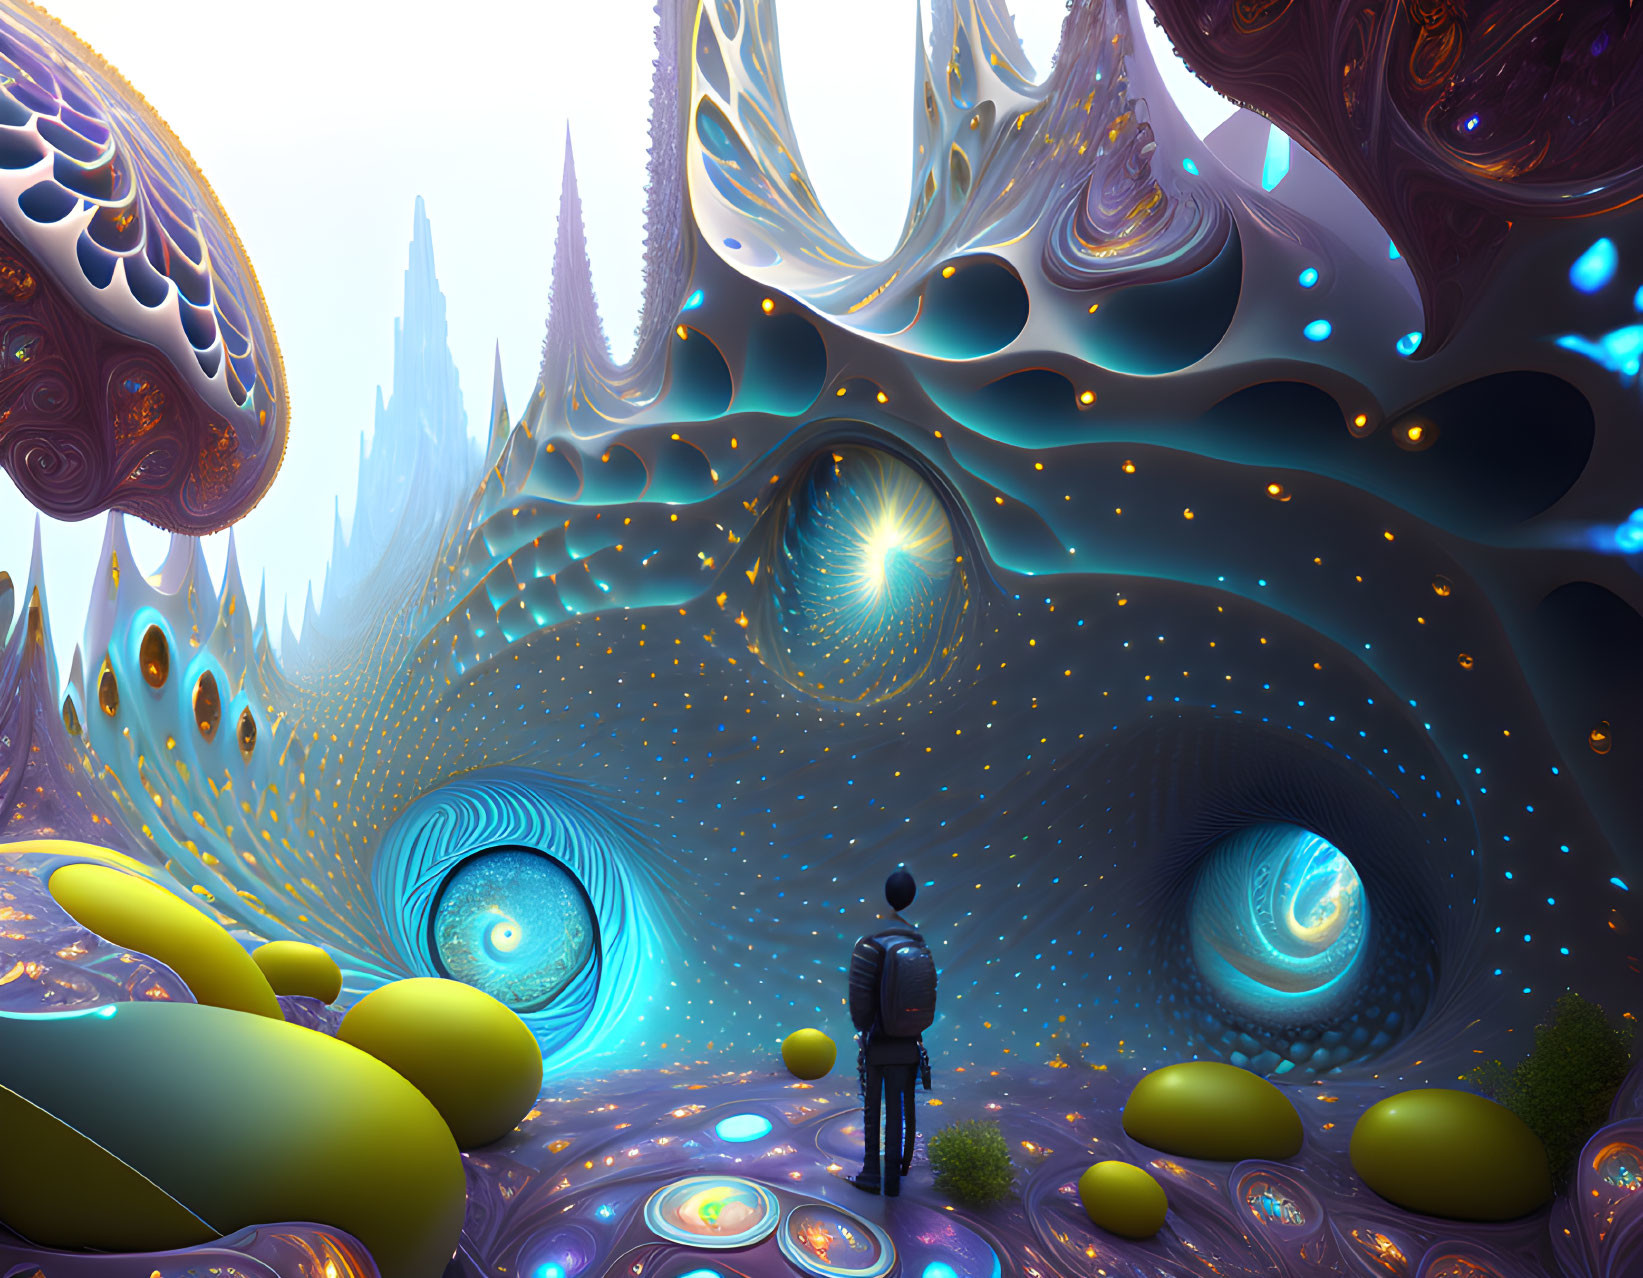 Surreal landscape with organic structures and glowing orbs